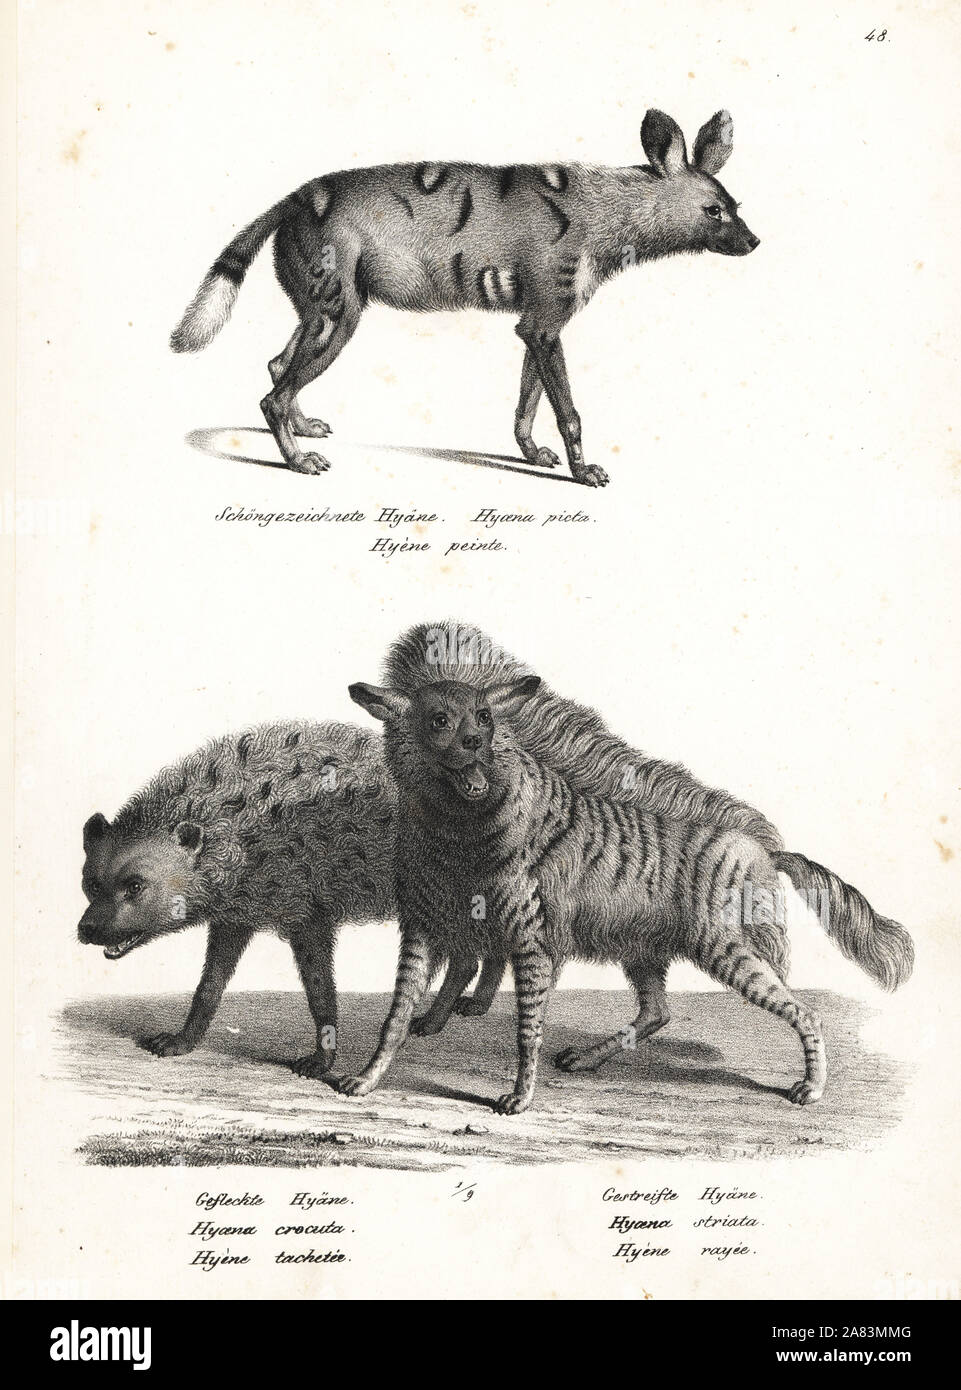 African wild dog, Lycaon pictus, endangered, spotted hyena, Crocuta crocuta, and striped hyena, Hyaena hyaena. Lithograph by Karl Joseph Brodtmann from Heinrich Rudolf Schinz's Illustrated Natural History of Men and Animals, 1836. Stock Photo